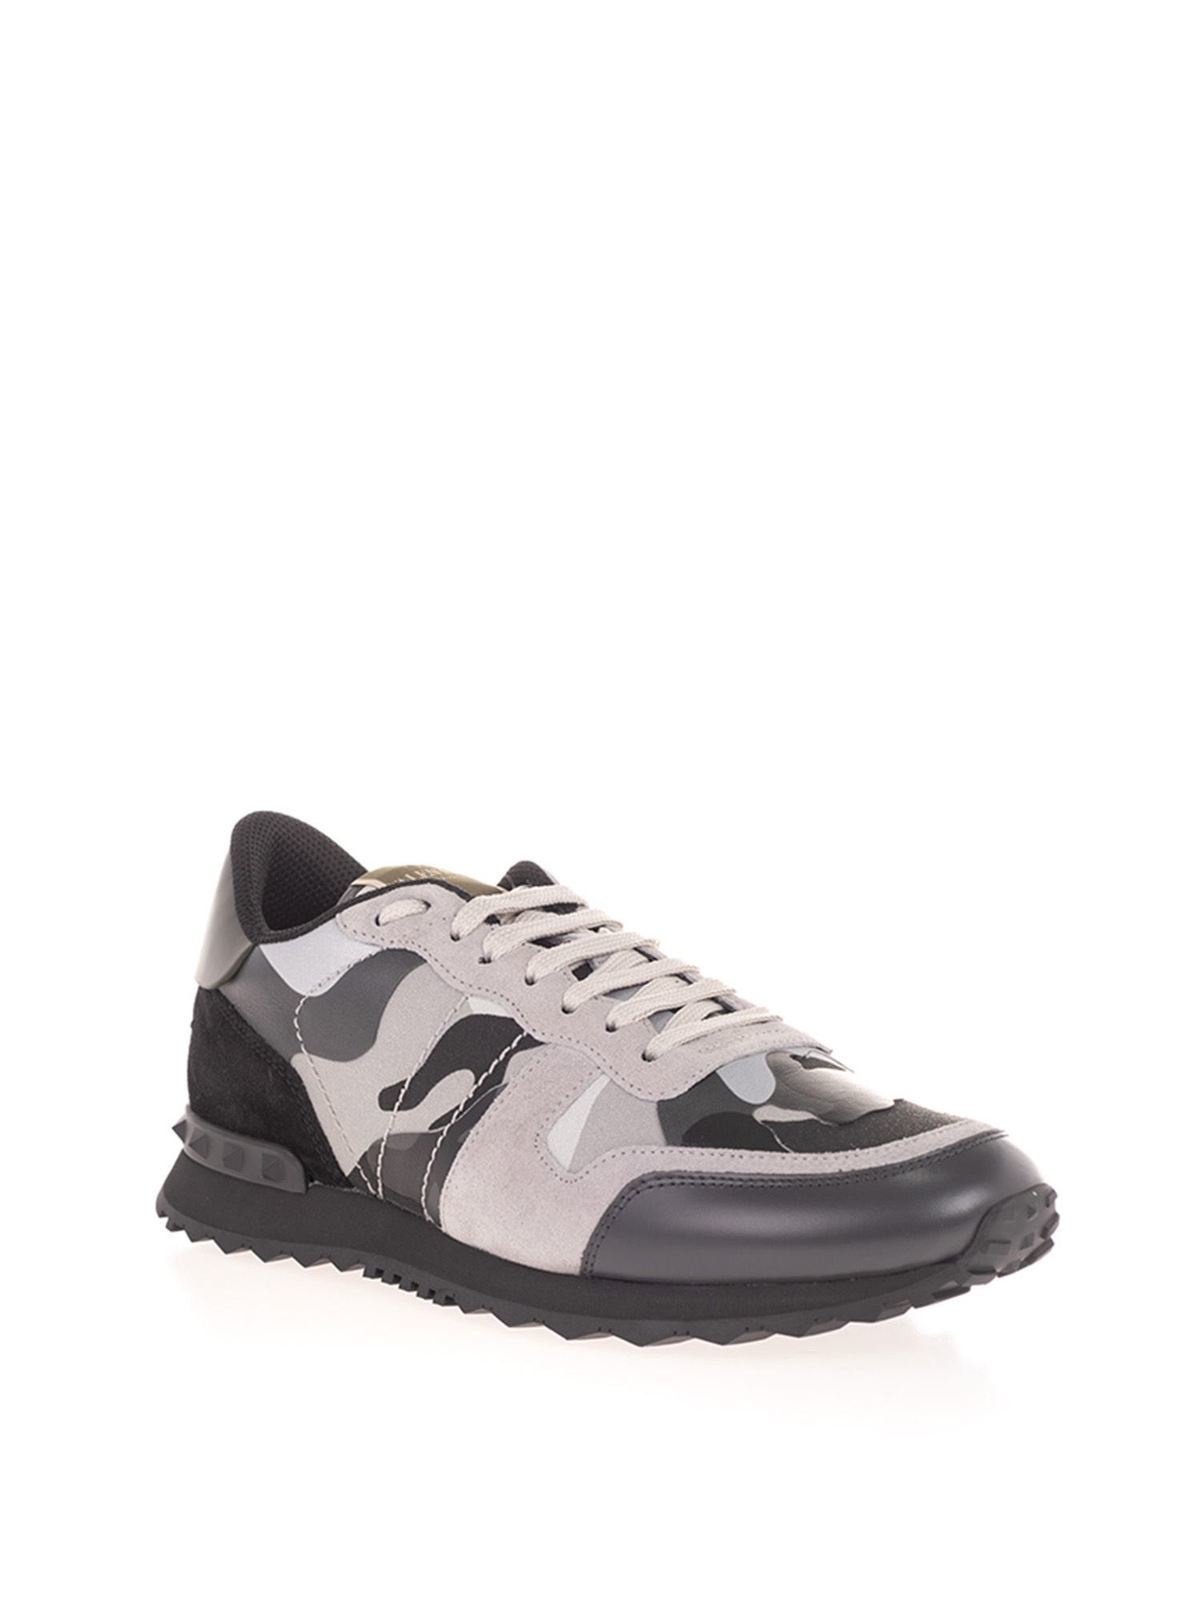 VALENTINO | NEW ARRIVALS | DERODELOPER.COM The Valentino rockrunner camouflage  sneaker for the fall / winter 2016 collection. Available Online & In Store  FOR…